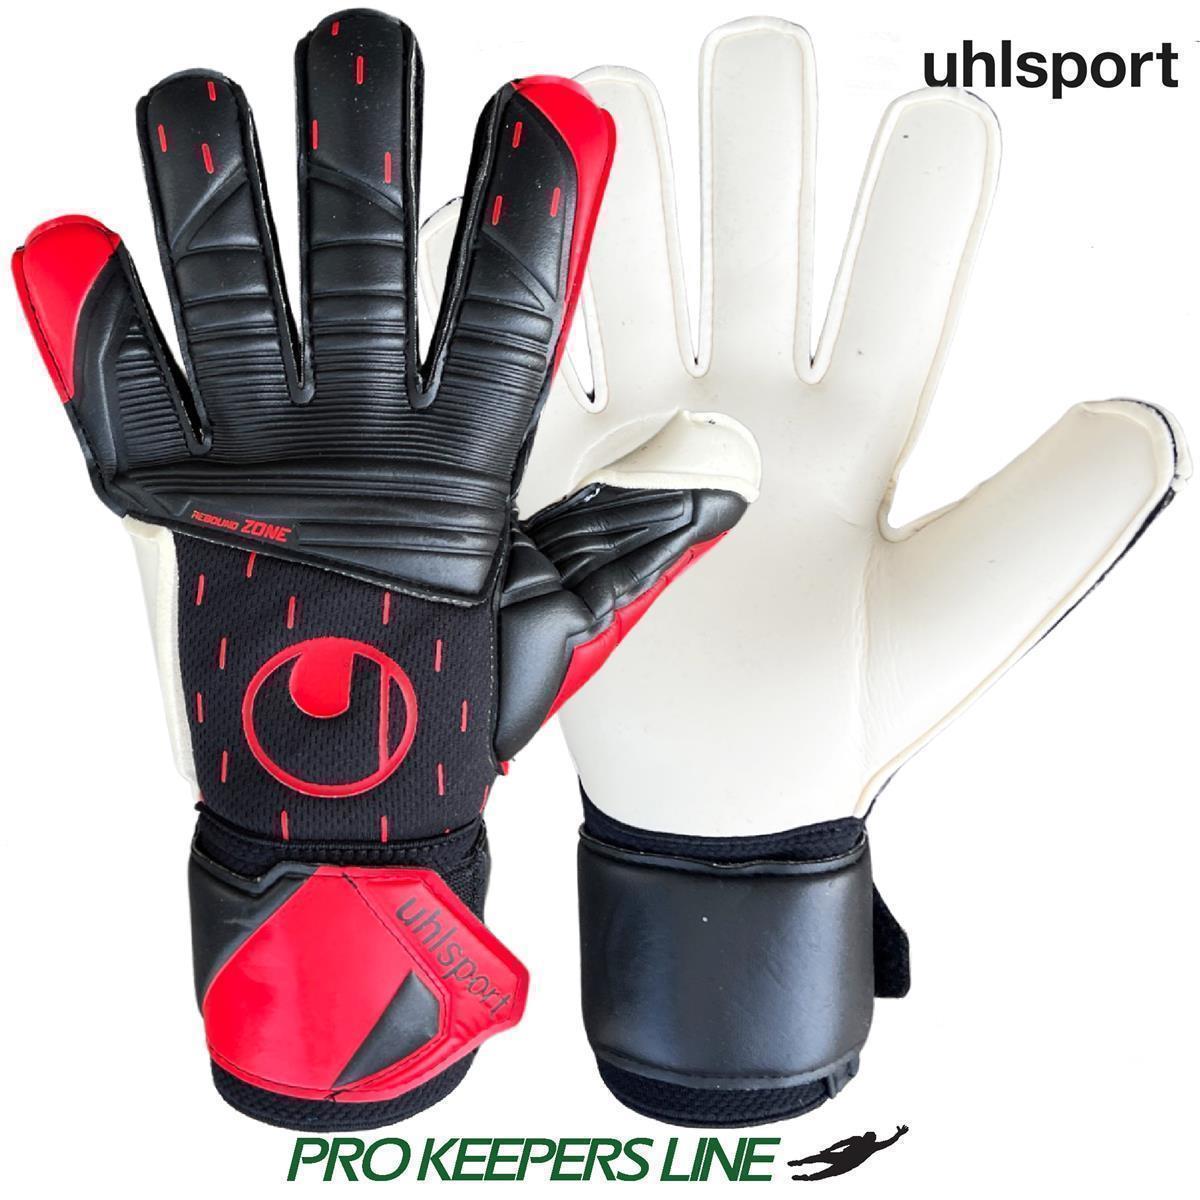 UHLSPORT CLASSIC ABSOLUTGRIP BLACK/RED